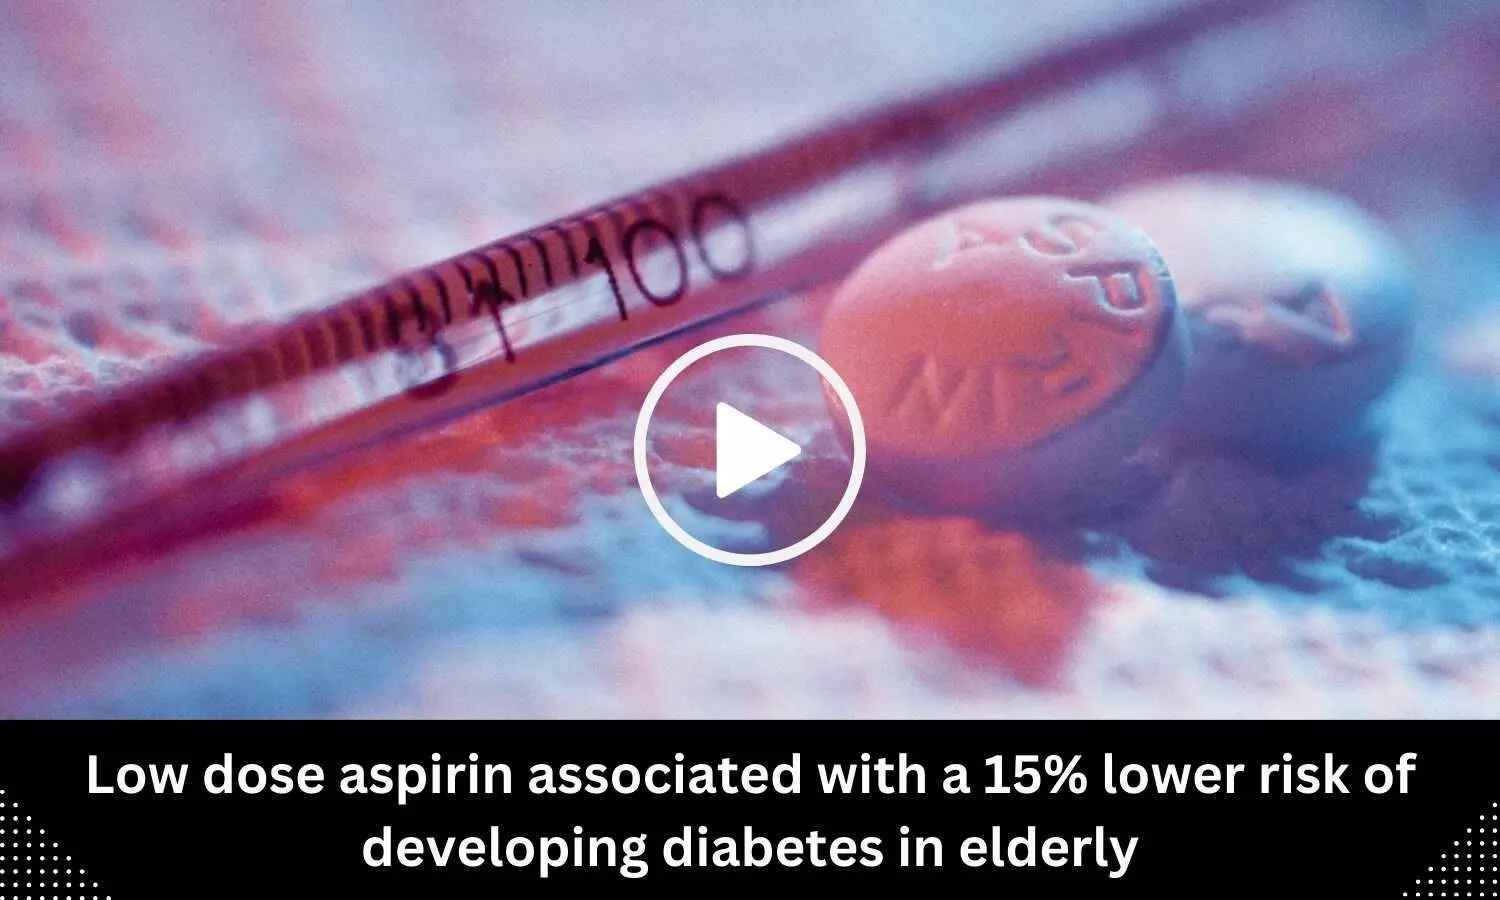 Low dose aspirin associated with a 15% lower risk of developing diabetes in elderly